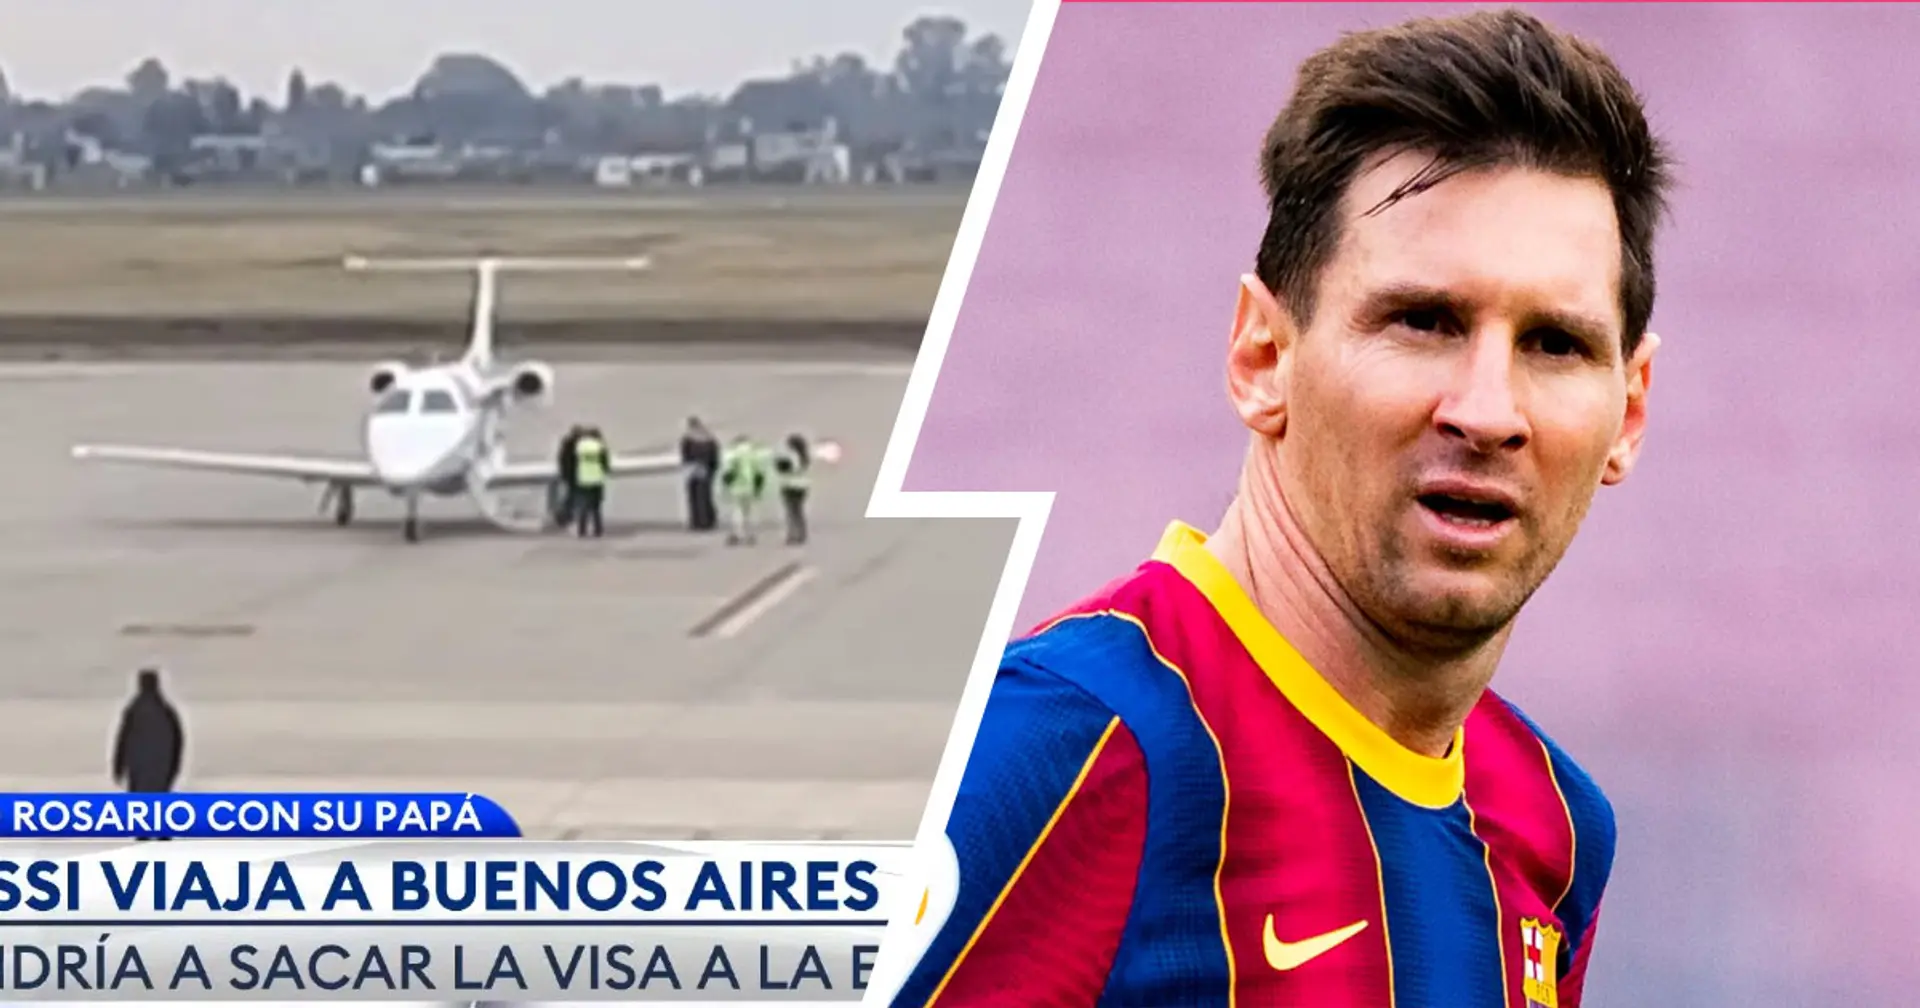 Short trip to Buenos Aires then off to Miami: Messi's vacation plans revealed